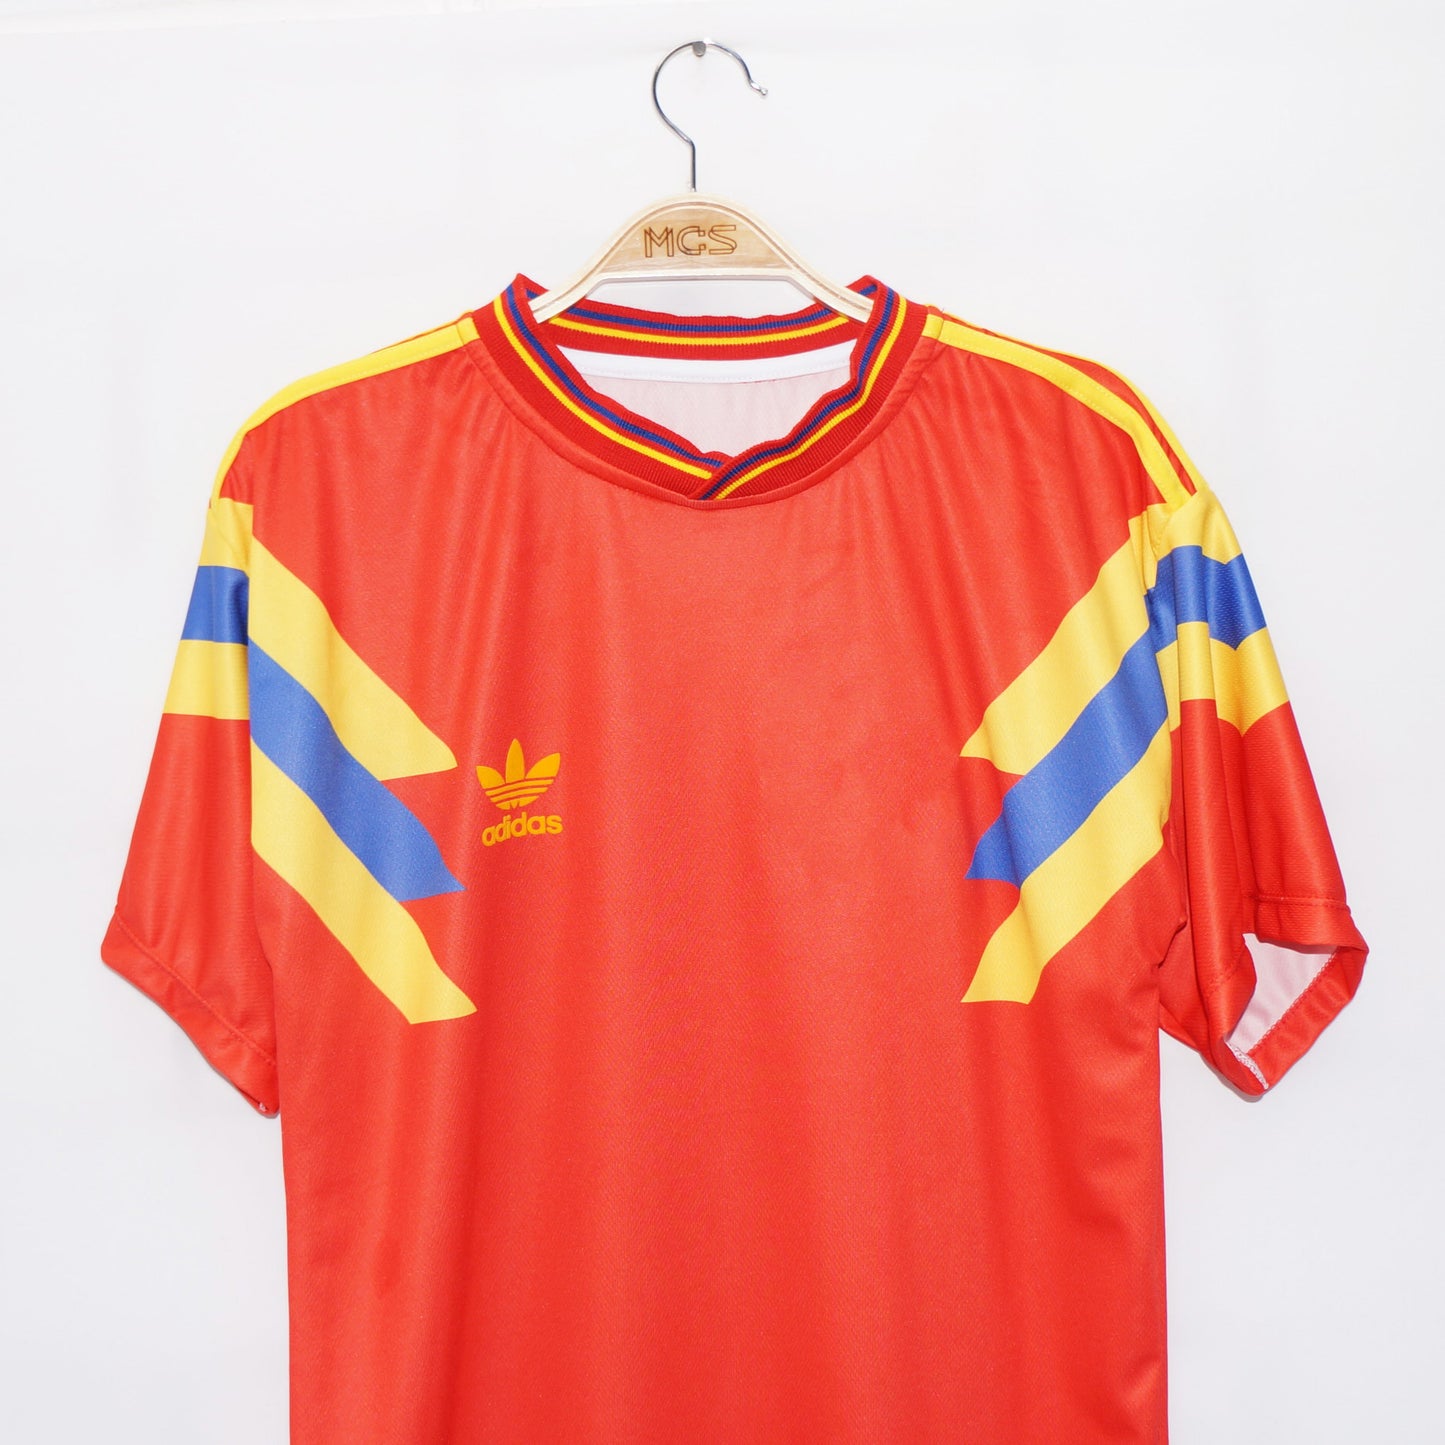 Red Colombia Shirt 1990